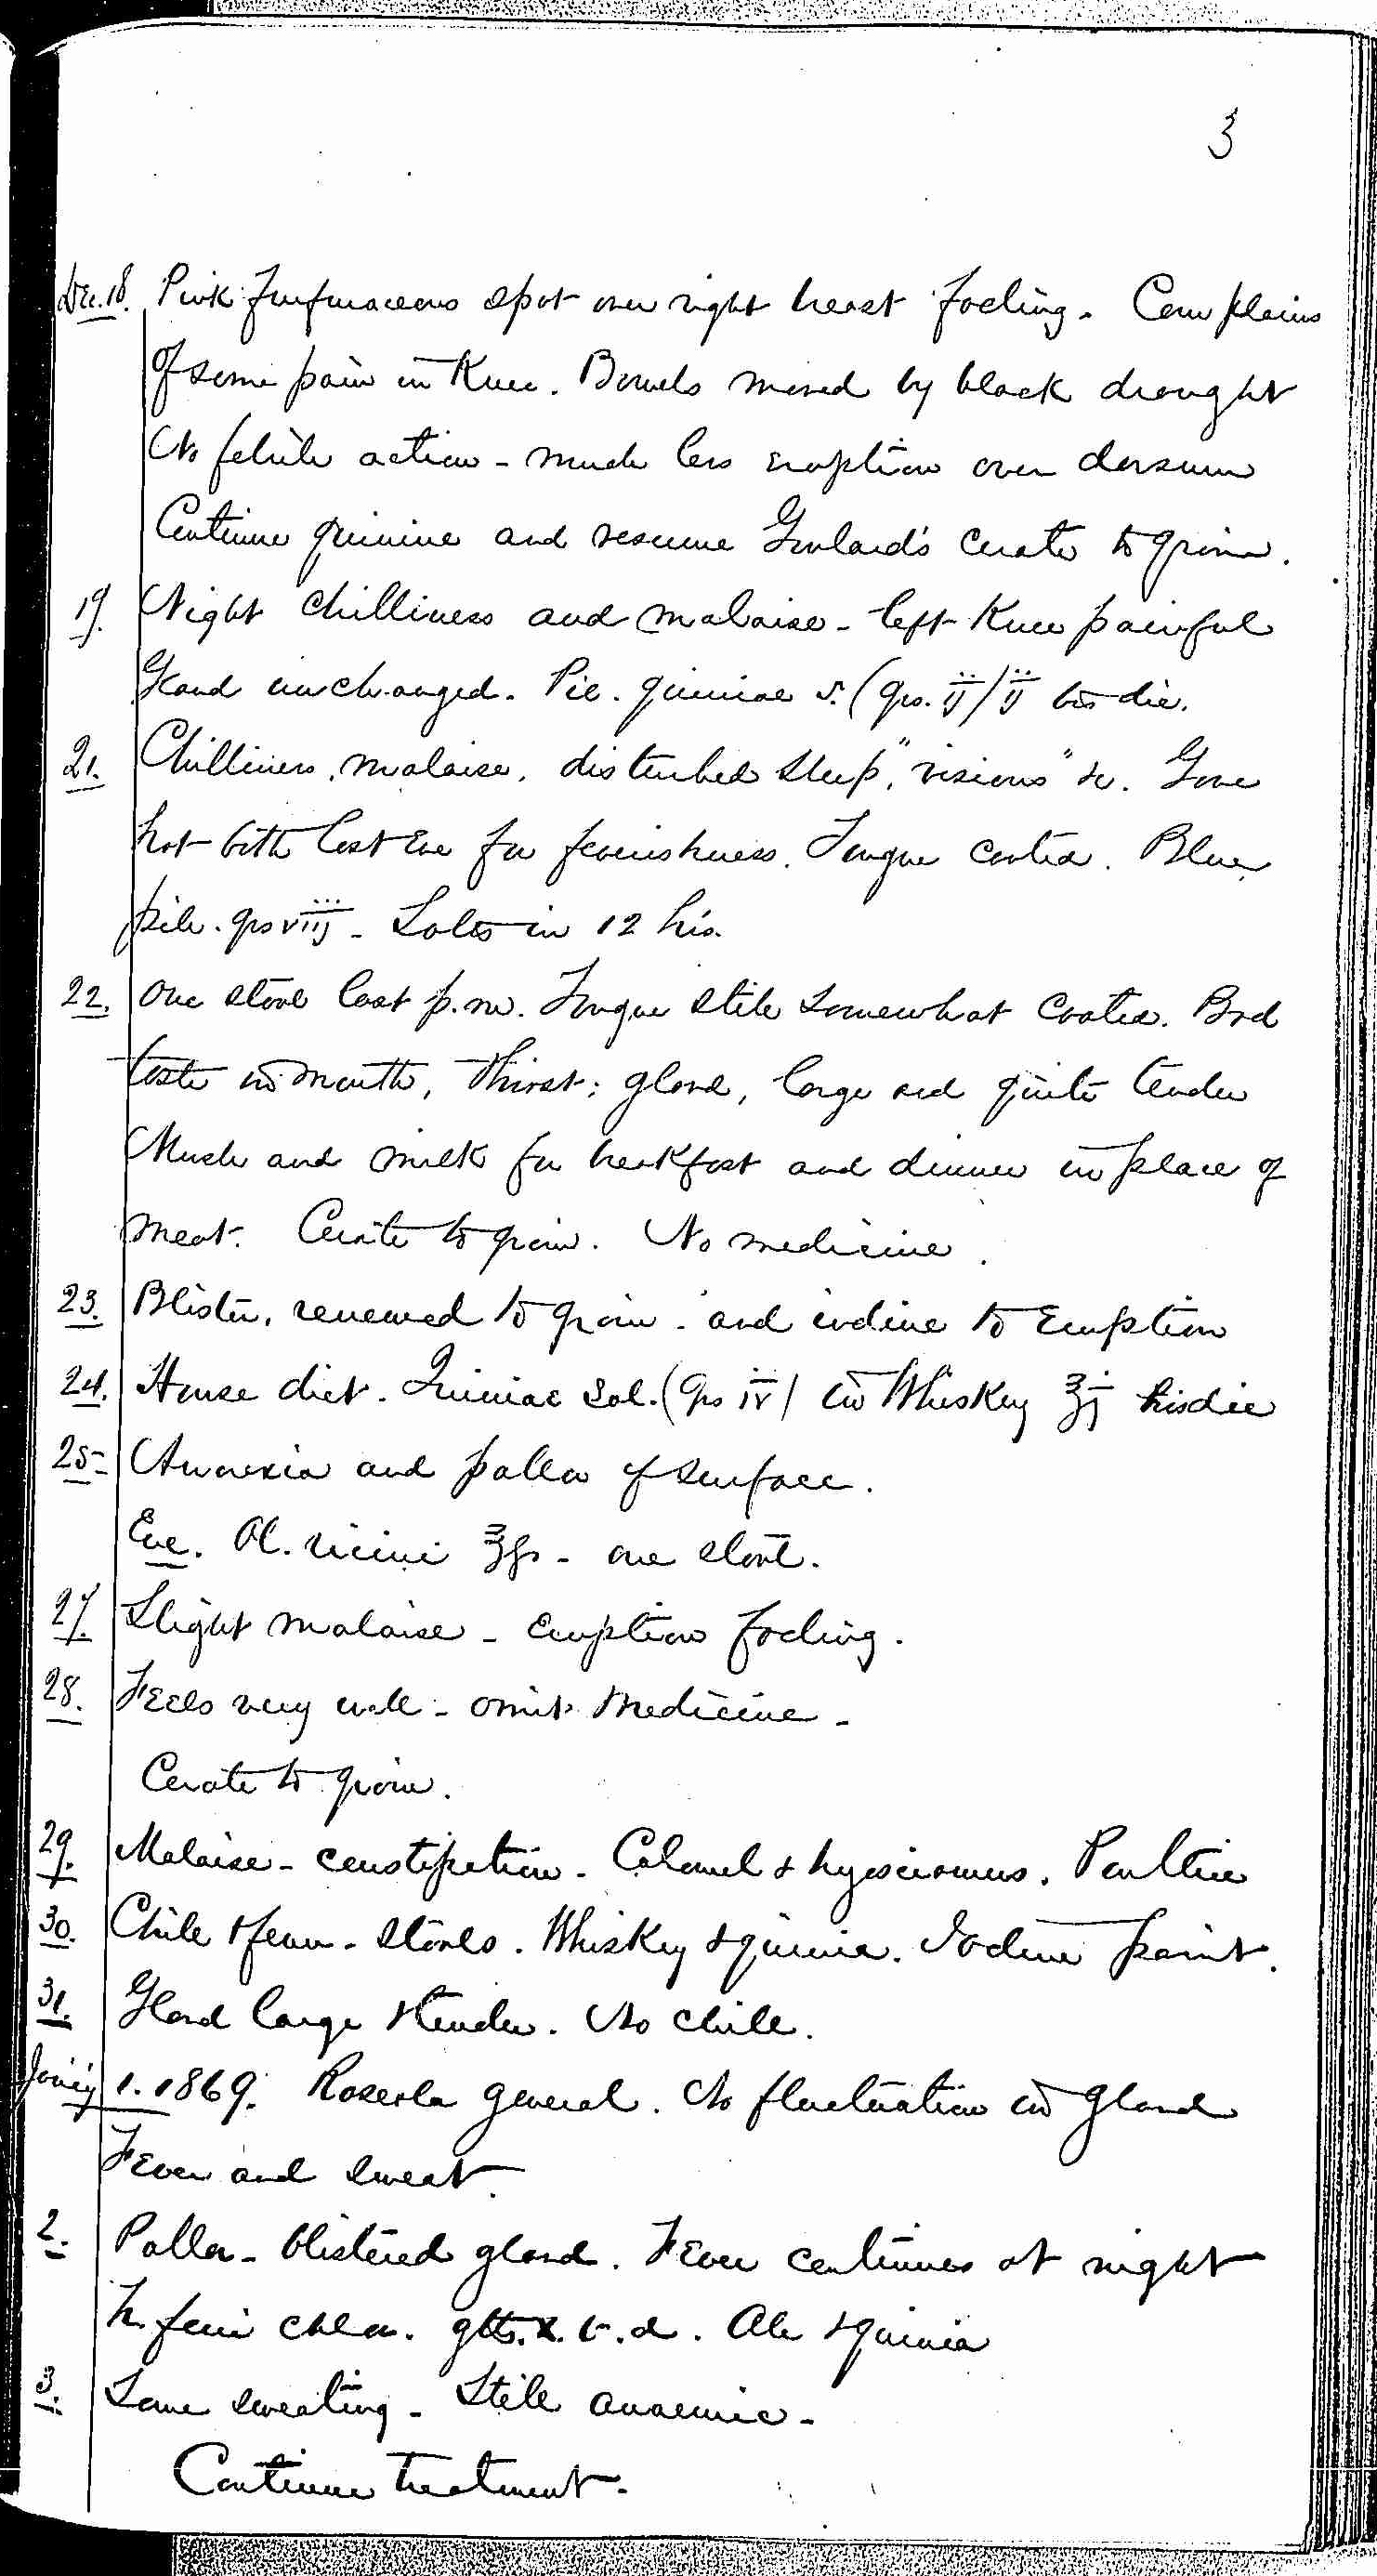 Entry for Eugene Smith (page 3 of 6) in the log Hospital Tickets and Case Papers - Naval Hospital - Washington, D.C. - 1868-69